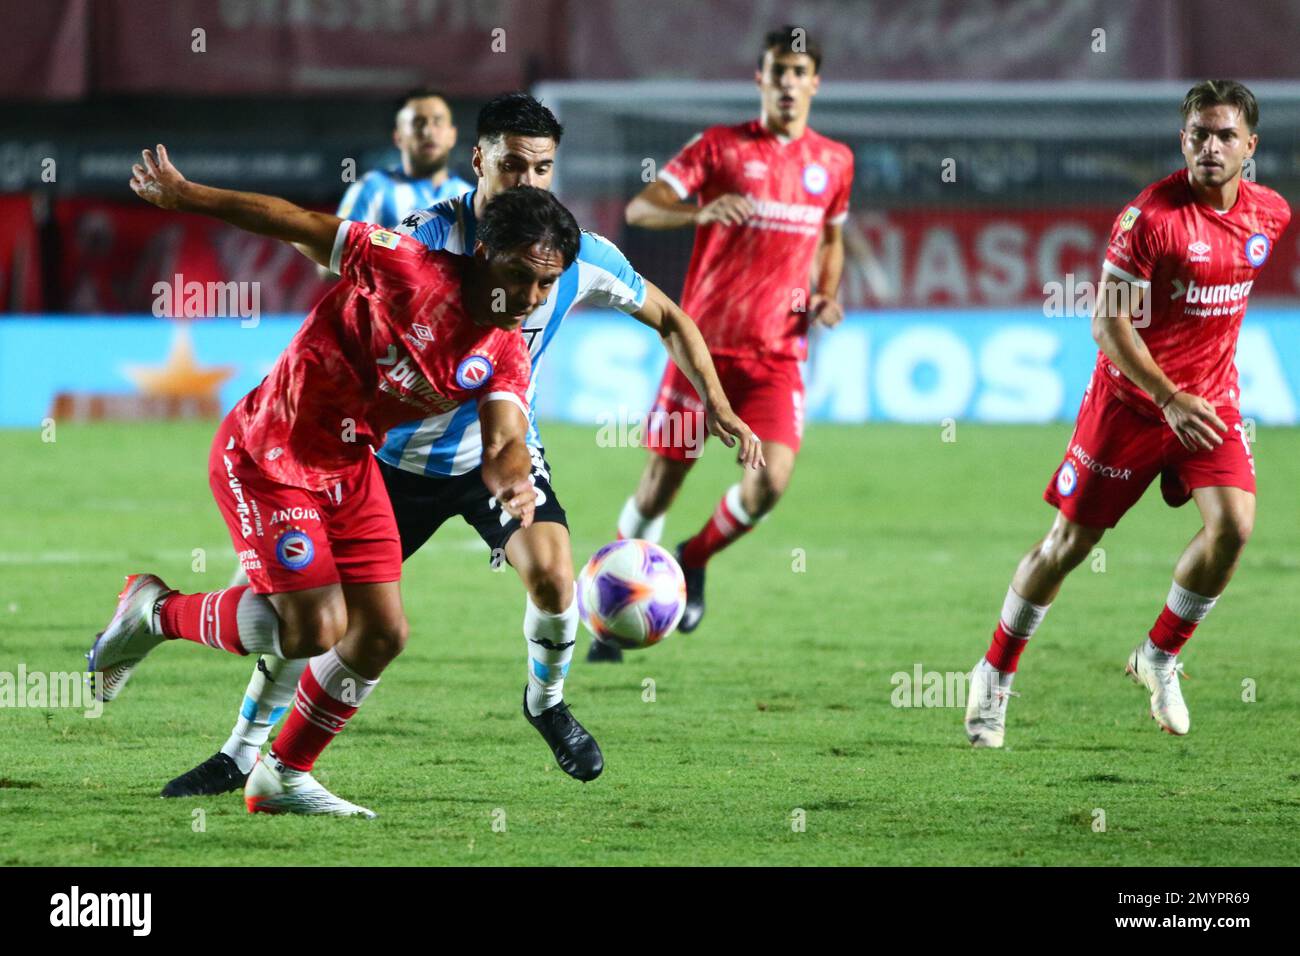 Buenos Aires, Argentina, 4th Feb 2023, of Argentinos Jrs during a match for the 2nd round of Argentina´s Liga Profesional de Fútbol Binance Cup at Libertadores Stadium (Photo: Néstor J. Beremblum) Credit: Néstor J. Beremblum/Alamy Live News Stock Photo